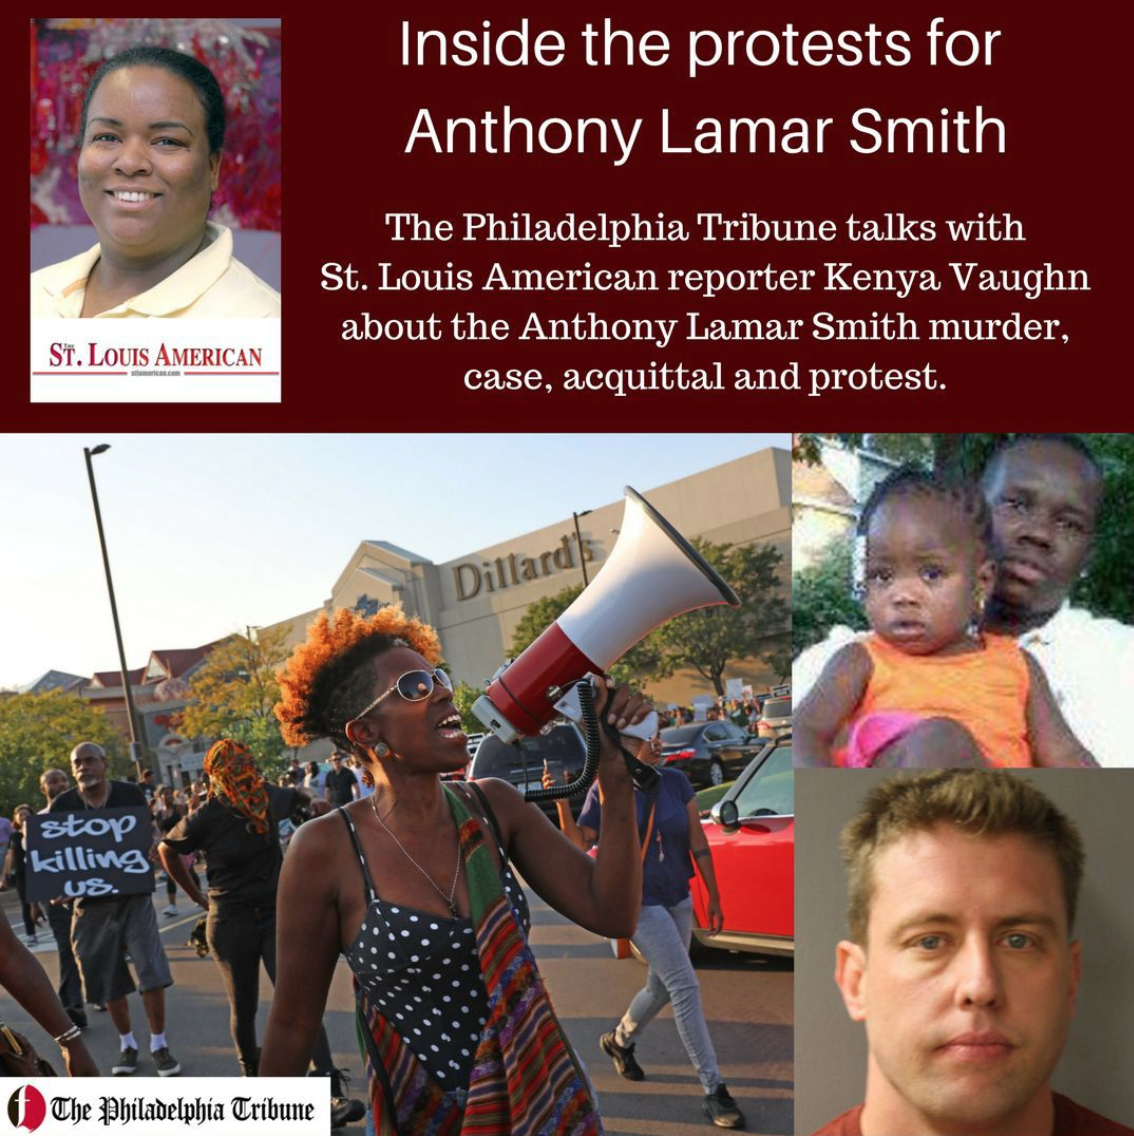 09/21/17: PODCAST: Inside the St. Louis protests following the acquittal in the Anthony Lamar Smith murder